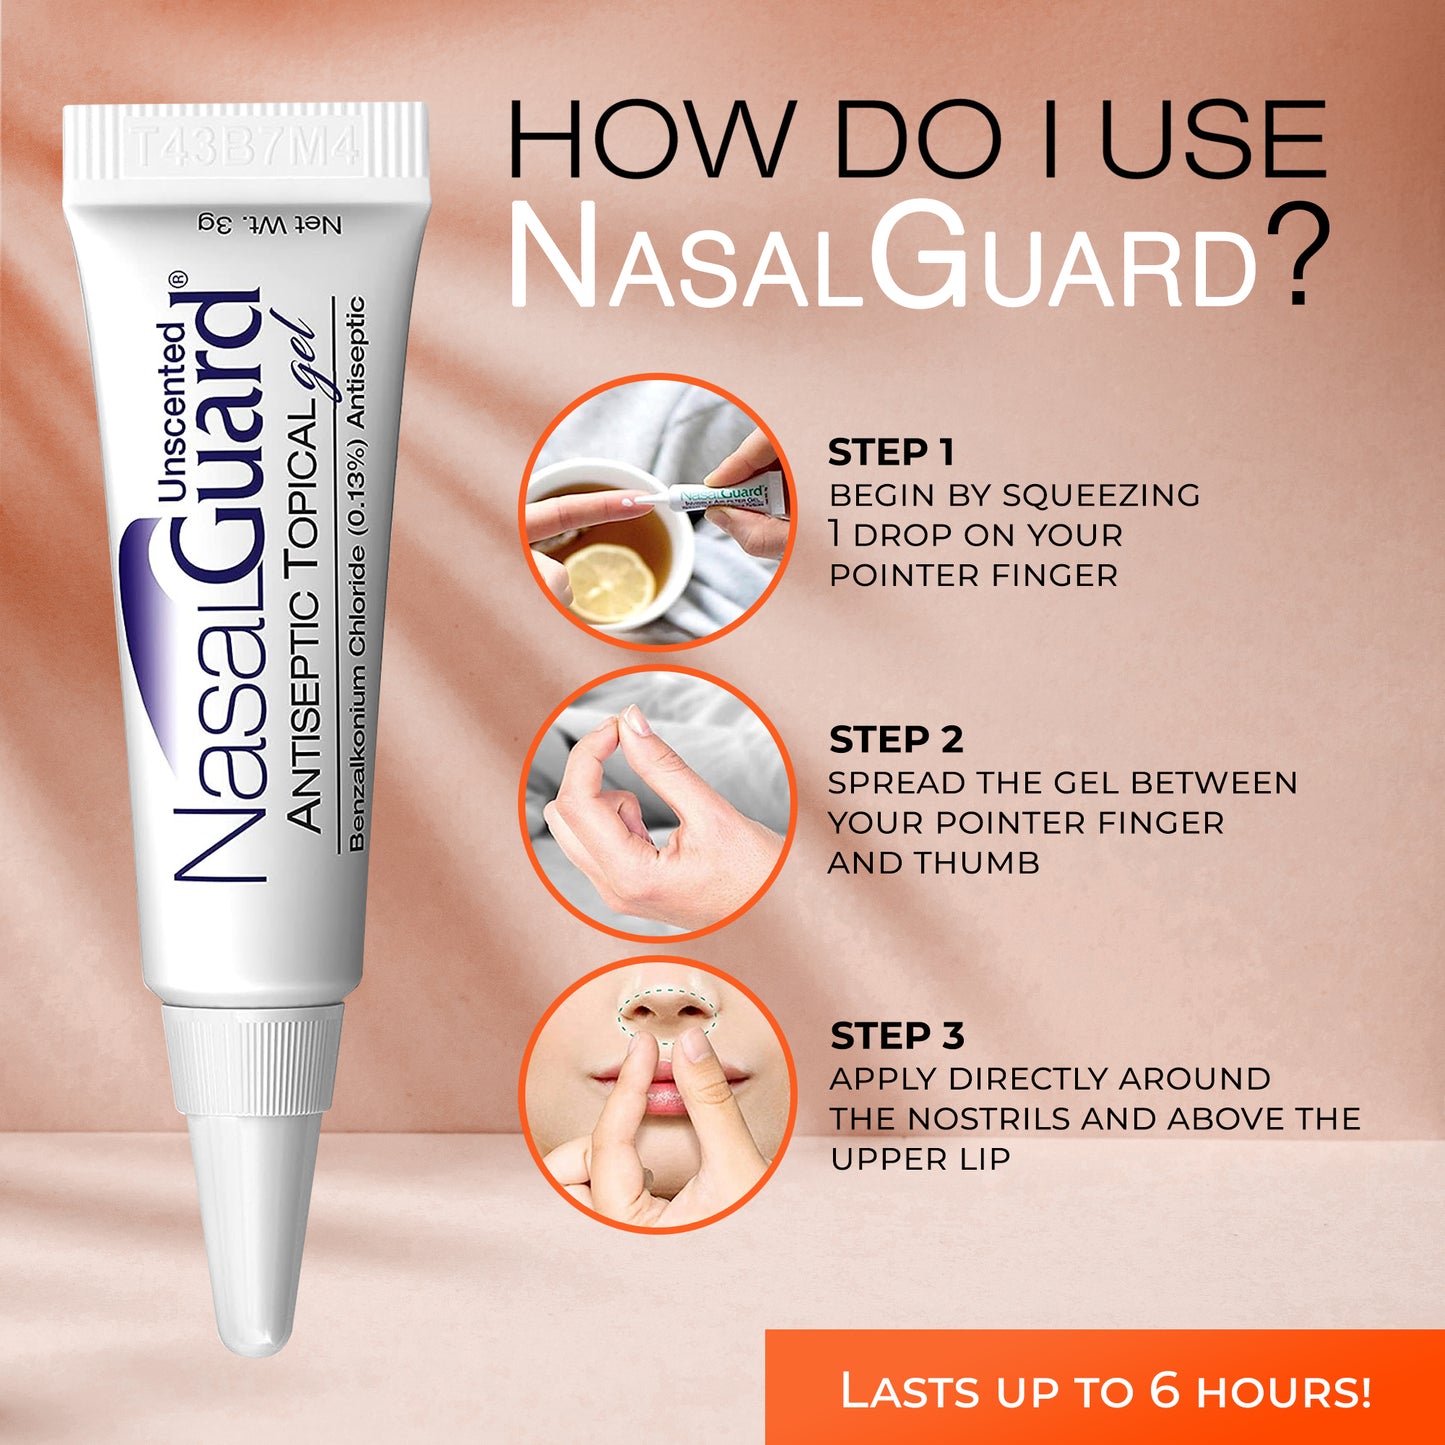 NasalGuard Antiseptic Topical Gel, Blocks & Kills 99.9% of Germs | Unscented | 3g Tube